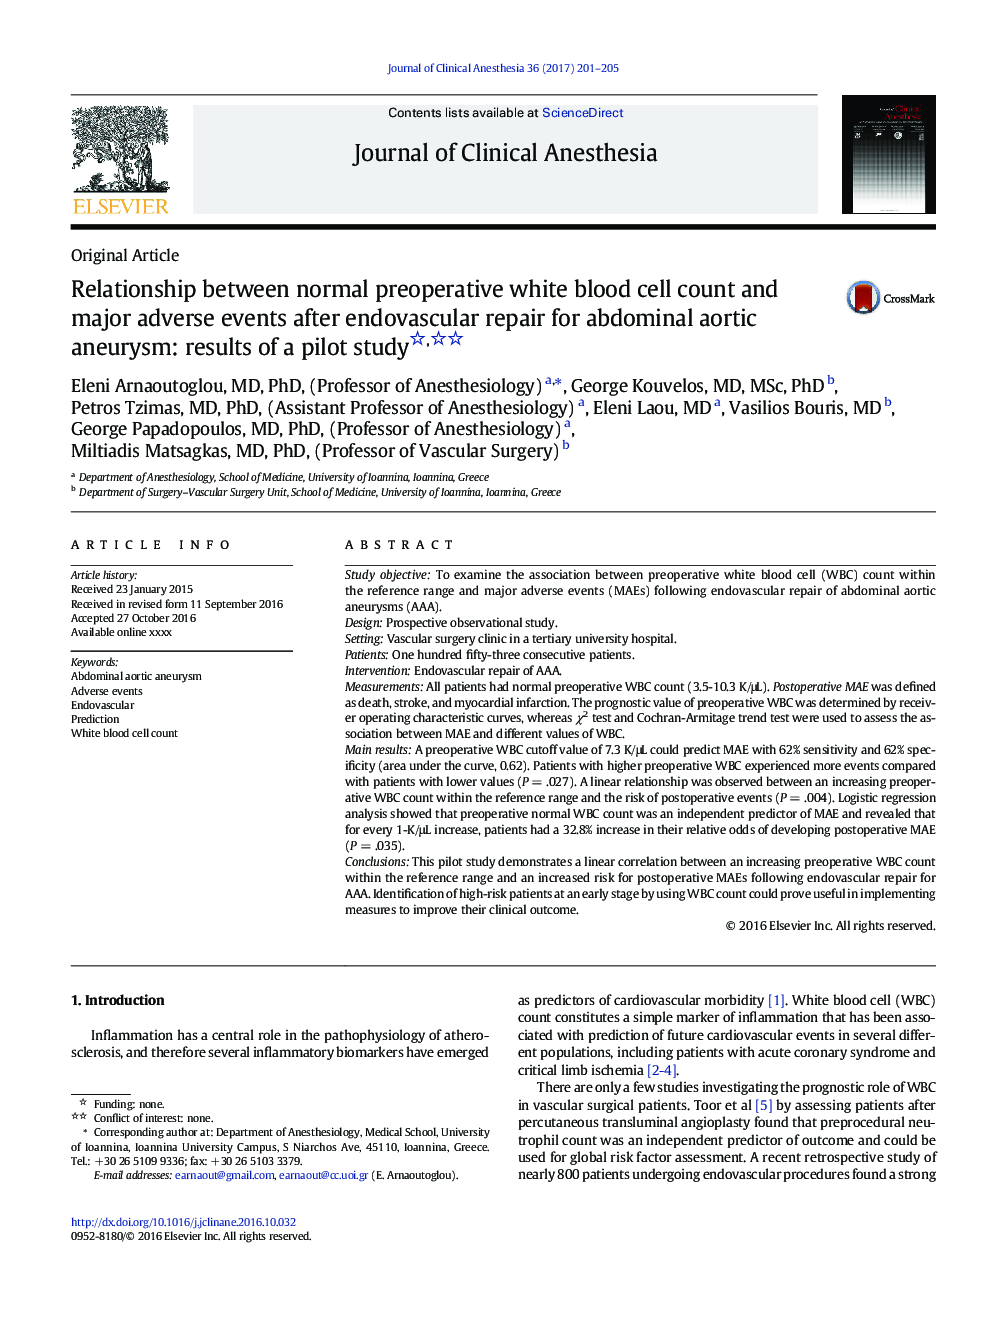 Relationship between normal preoperative white blood cell count and major adverse events after endovascular repair for abdominal aortic aneurysm: results of a pilot study